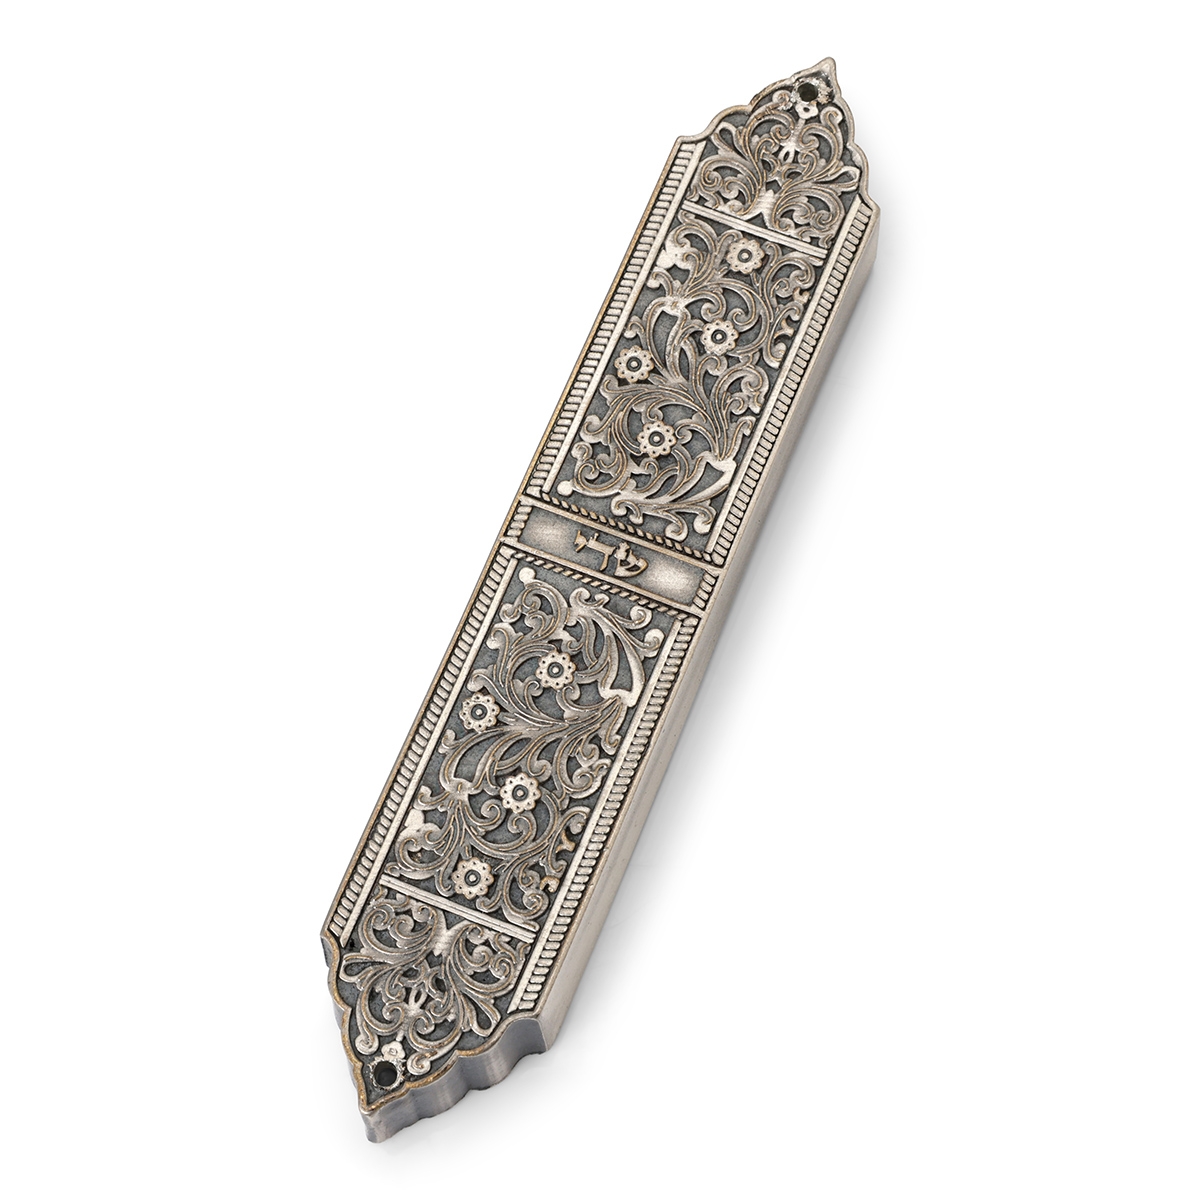 Intricate Pewter Mezuzah Case - Israel Museum Collection - 1